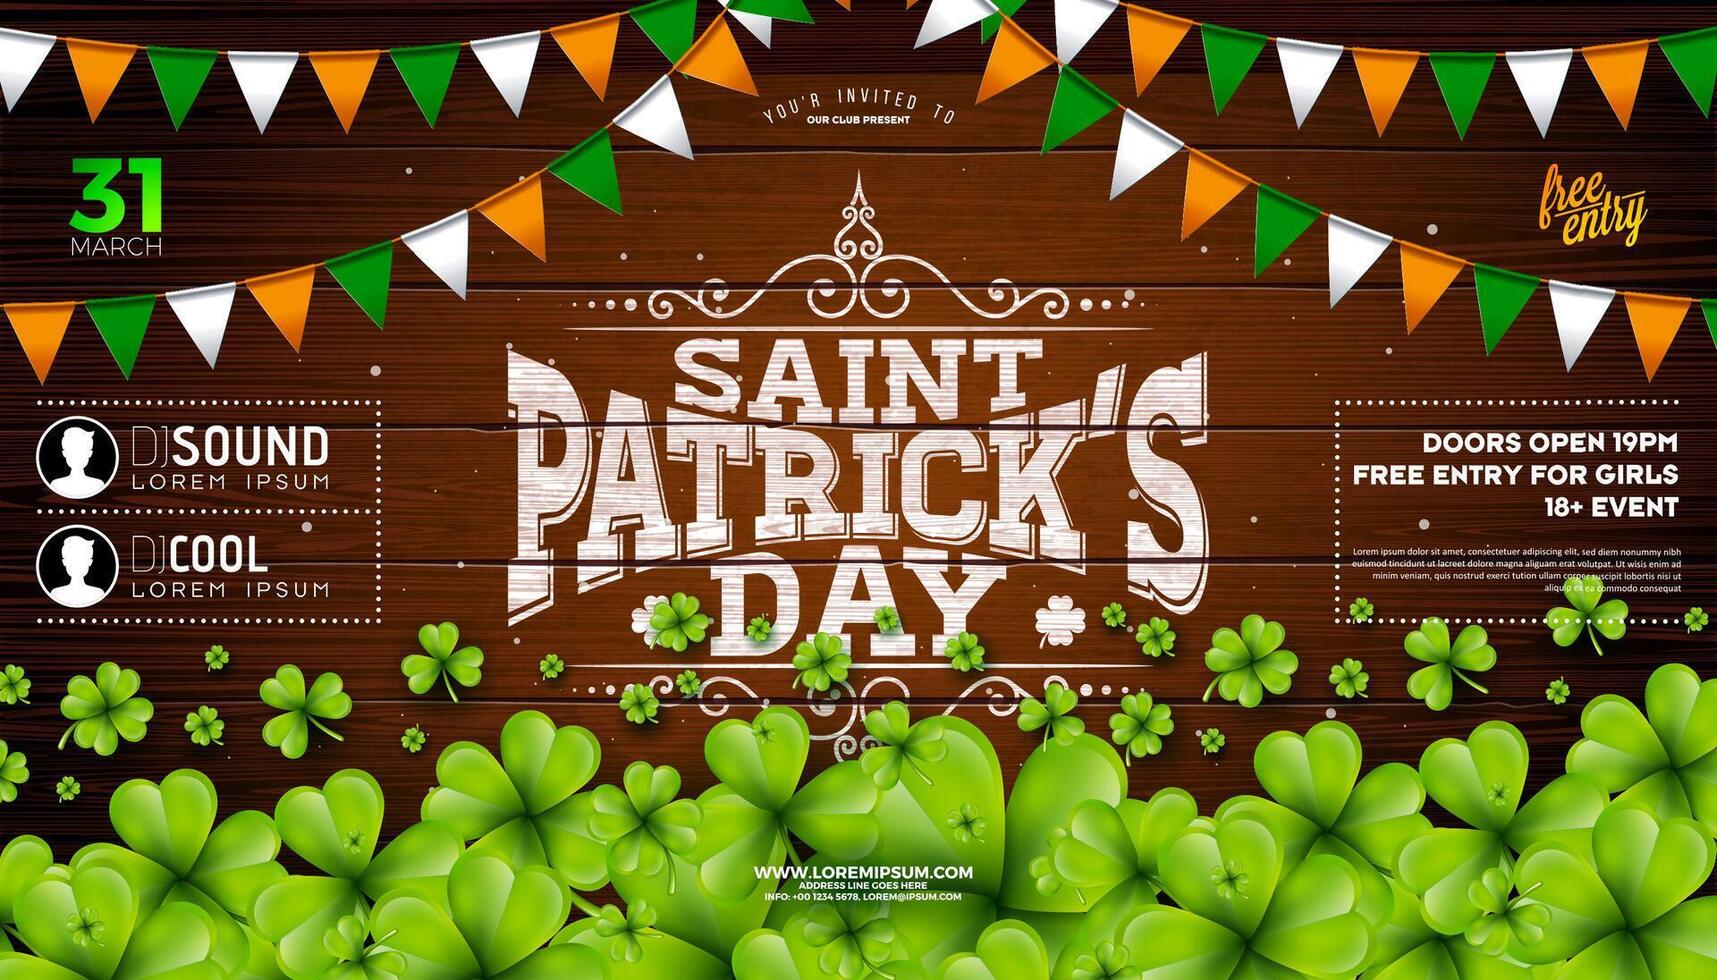 Saint Patrick's Day Party Flyer Illustration with Falling Clover Leaves and Flag on Vintage Wood Background. Irish Traditional St. Patricks Day Lucky Celebration Vector Design for Flyer, Greeting Card